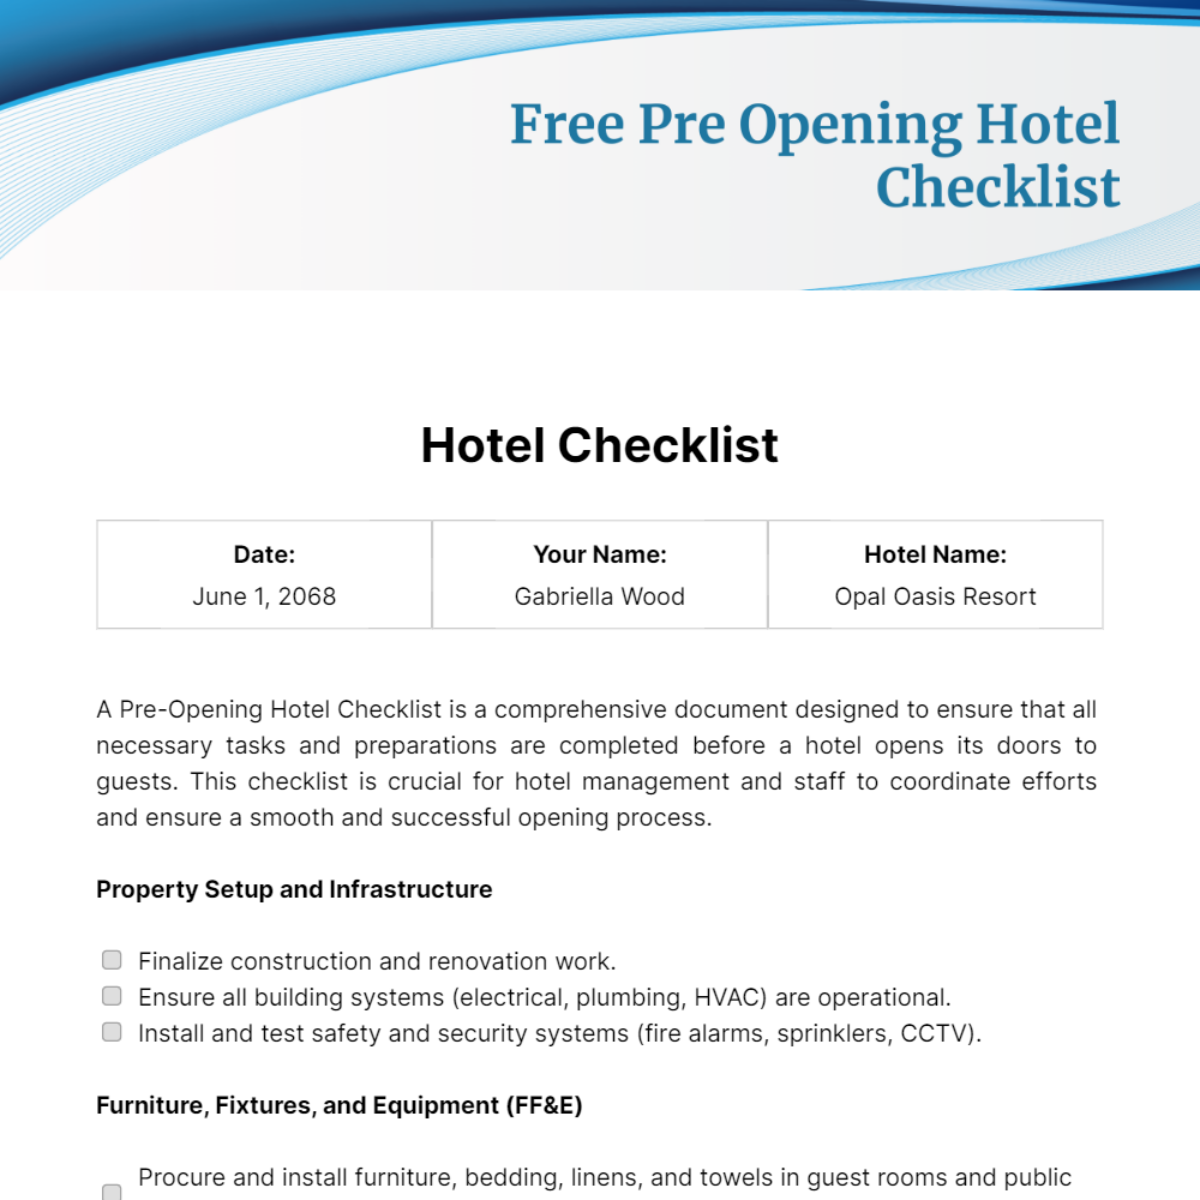 Free Pre Opening Hotel Checklist Template 